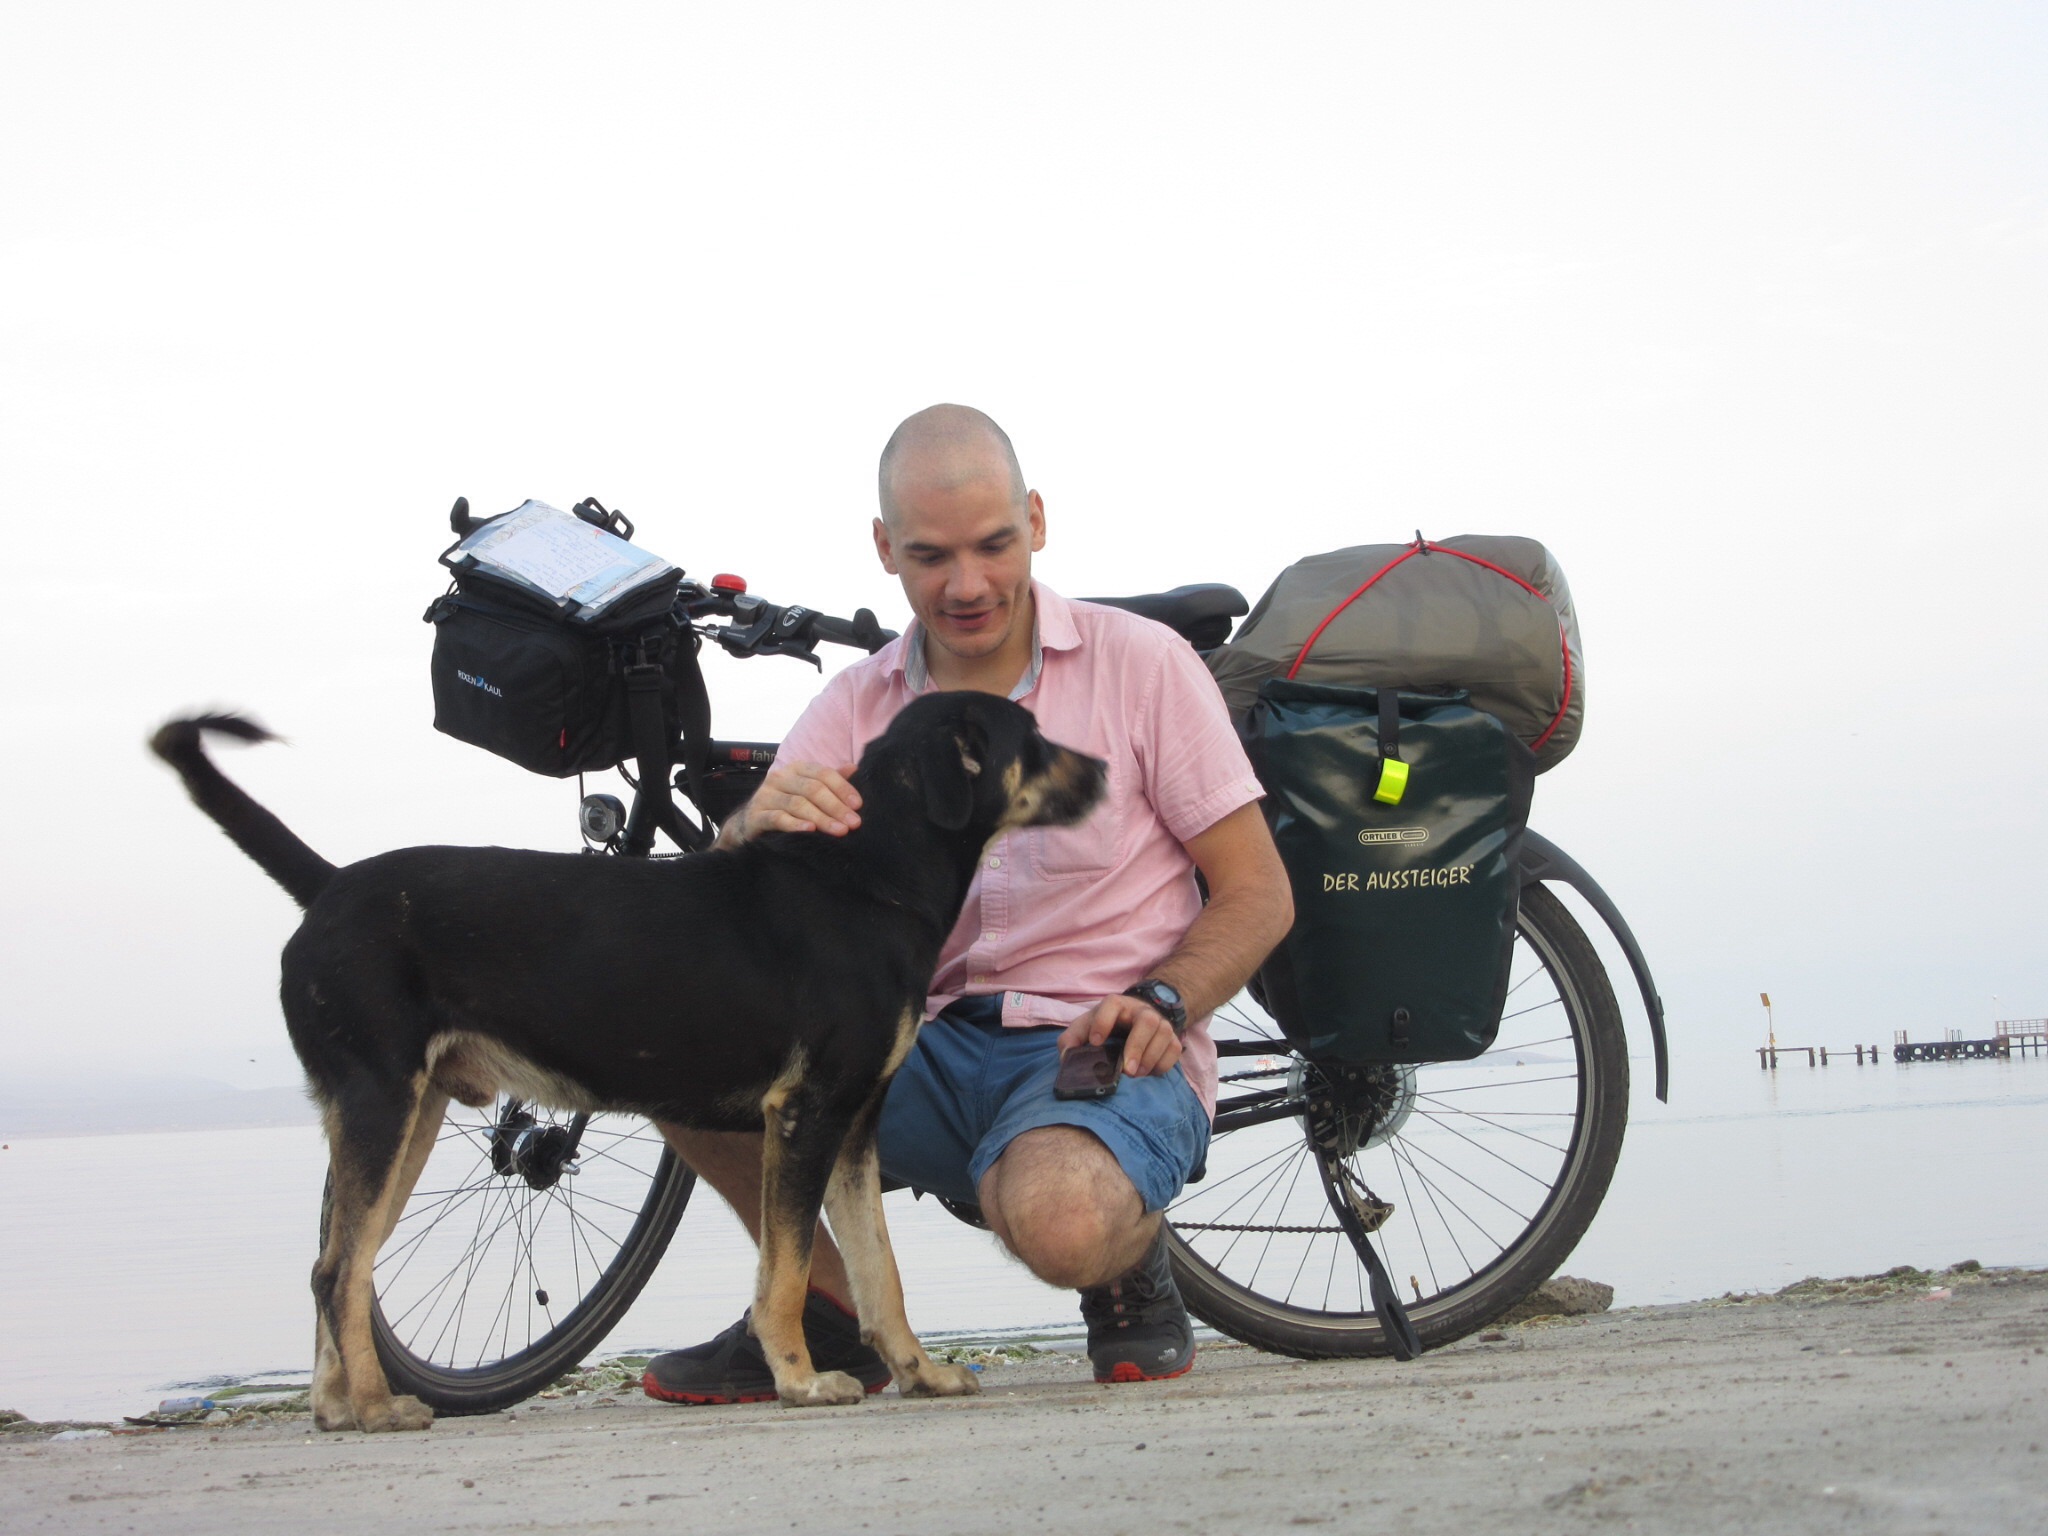 Pacific to Atlantic by bicycle. Day 1: Pisco to Ica via Paracas (12.03, 77 km)